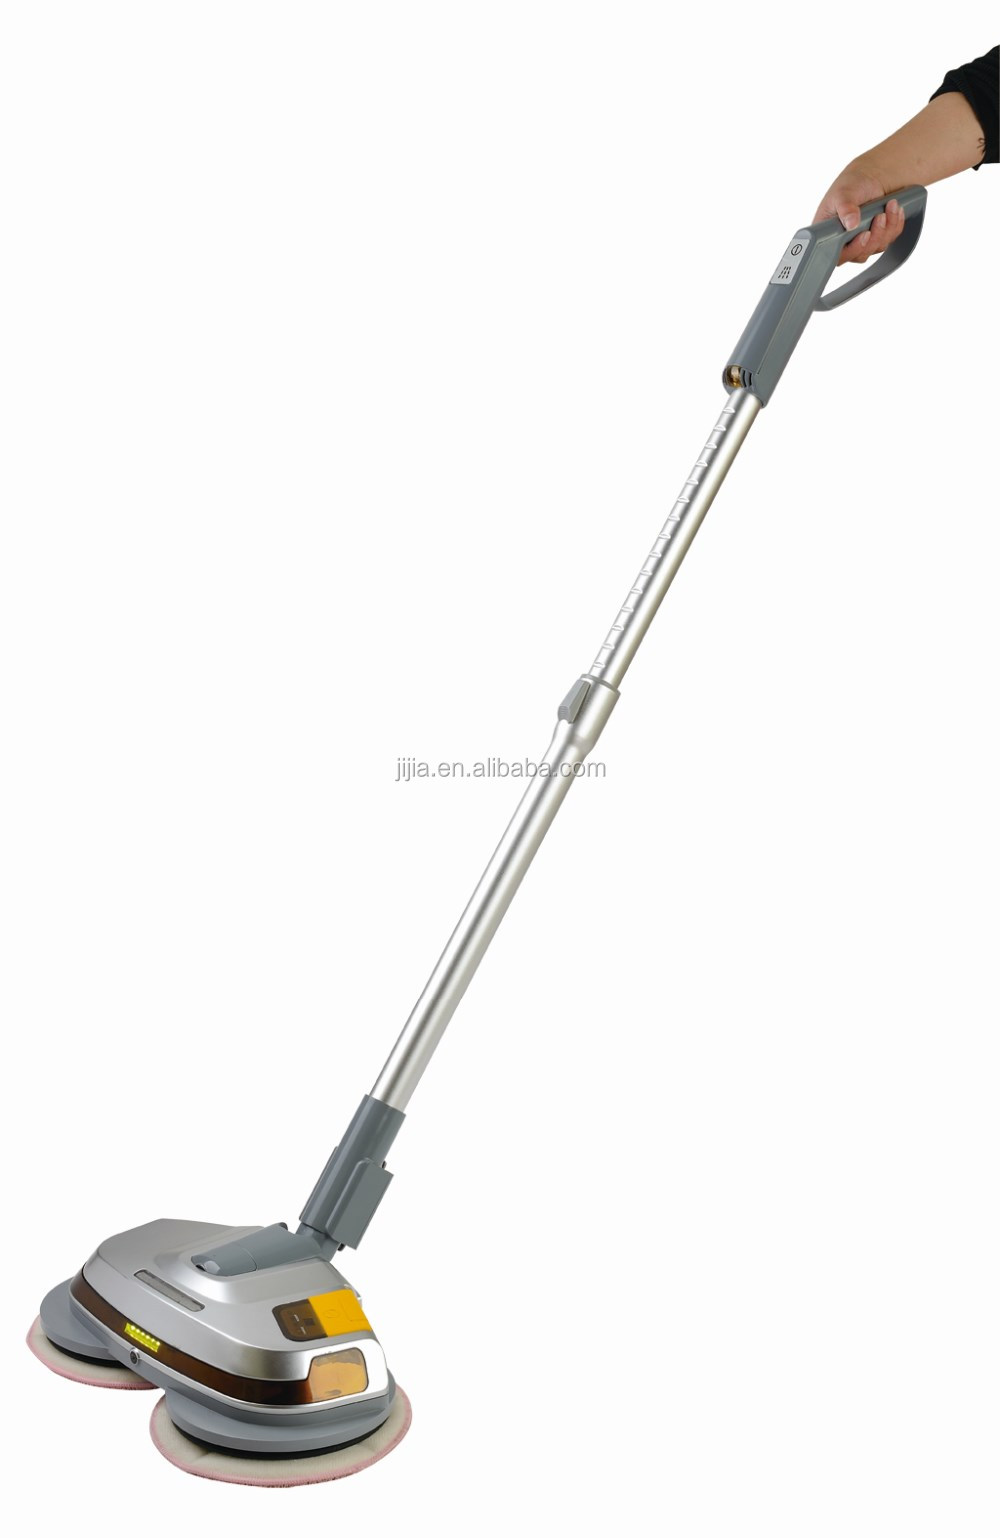 Cordless Floor Polisher And Spin Mop Buy Cordless Floor Polisher